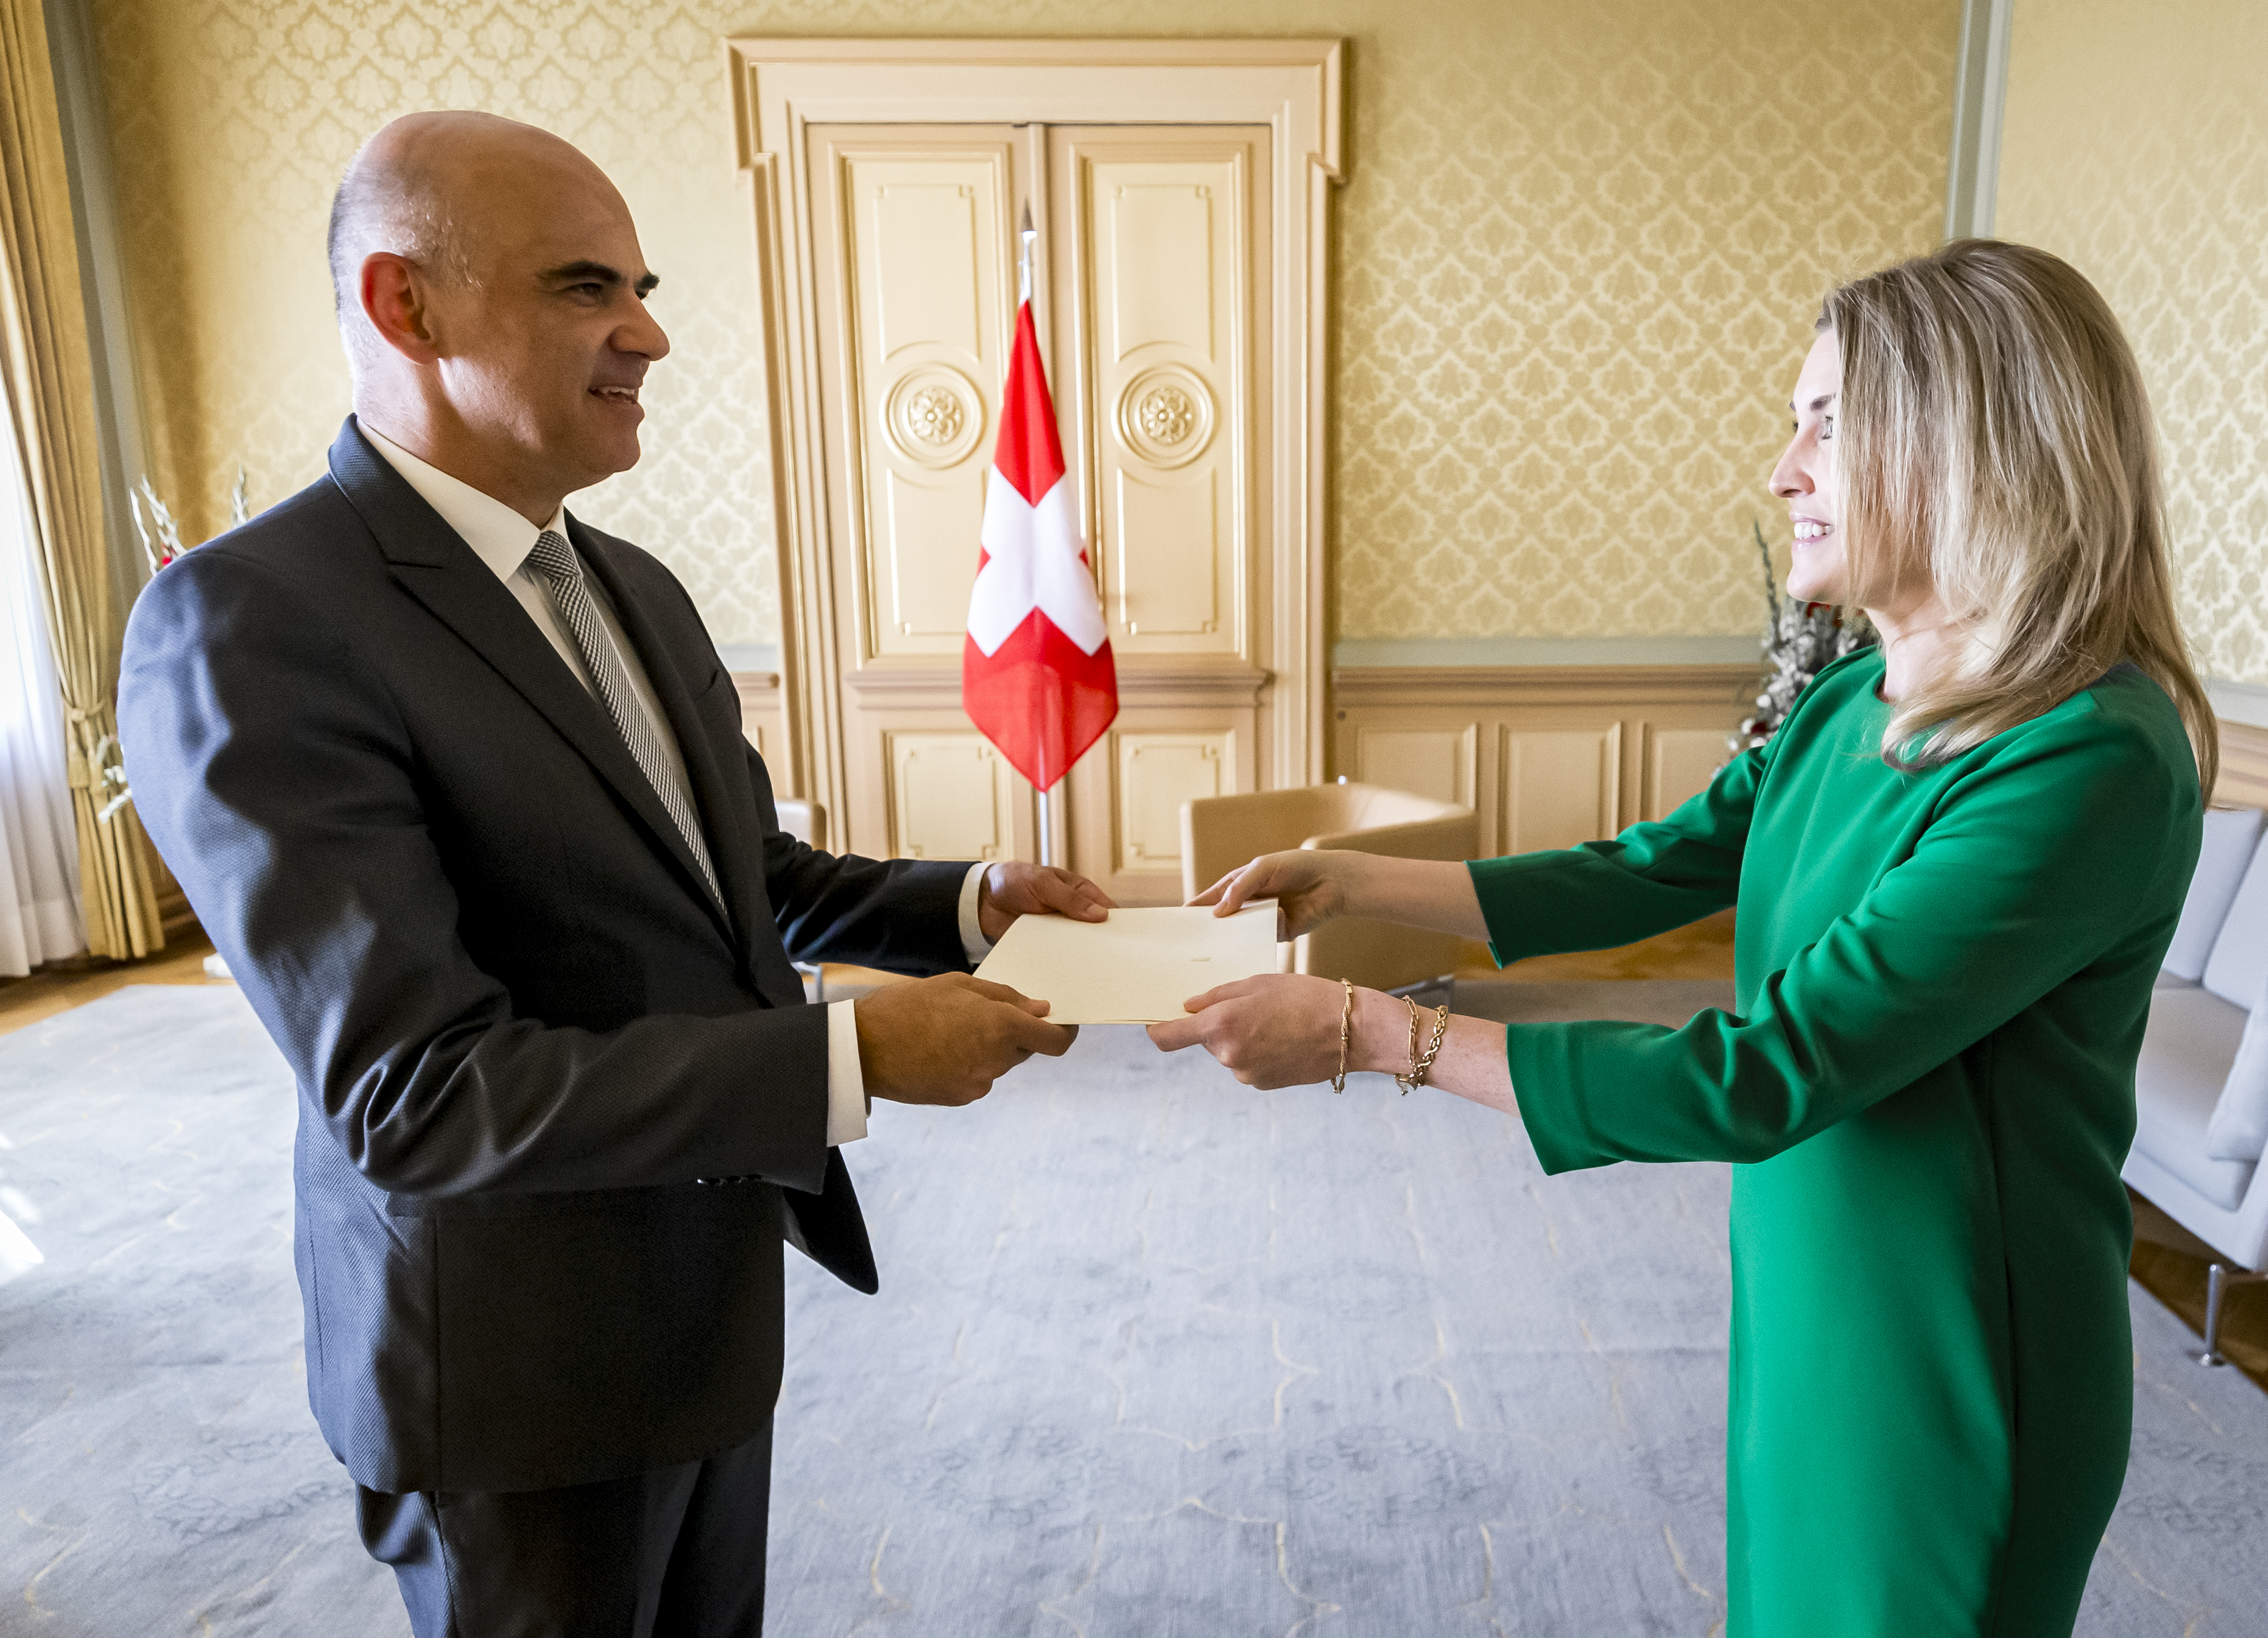 Ambassador Aoife McGarry presents credentials to President of the Swiss Confederation Alain Berset